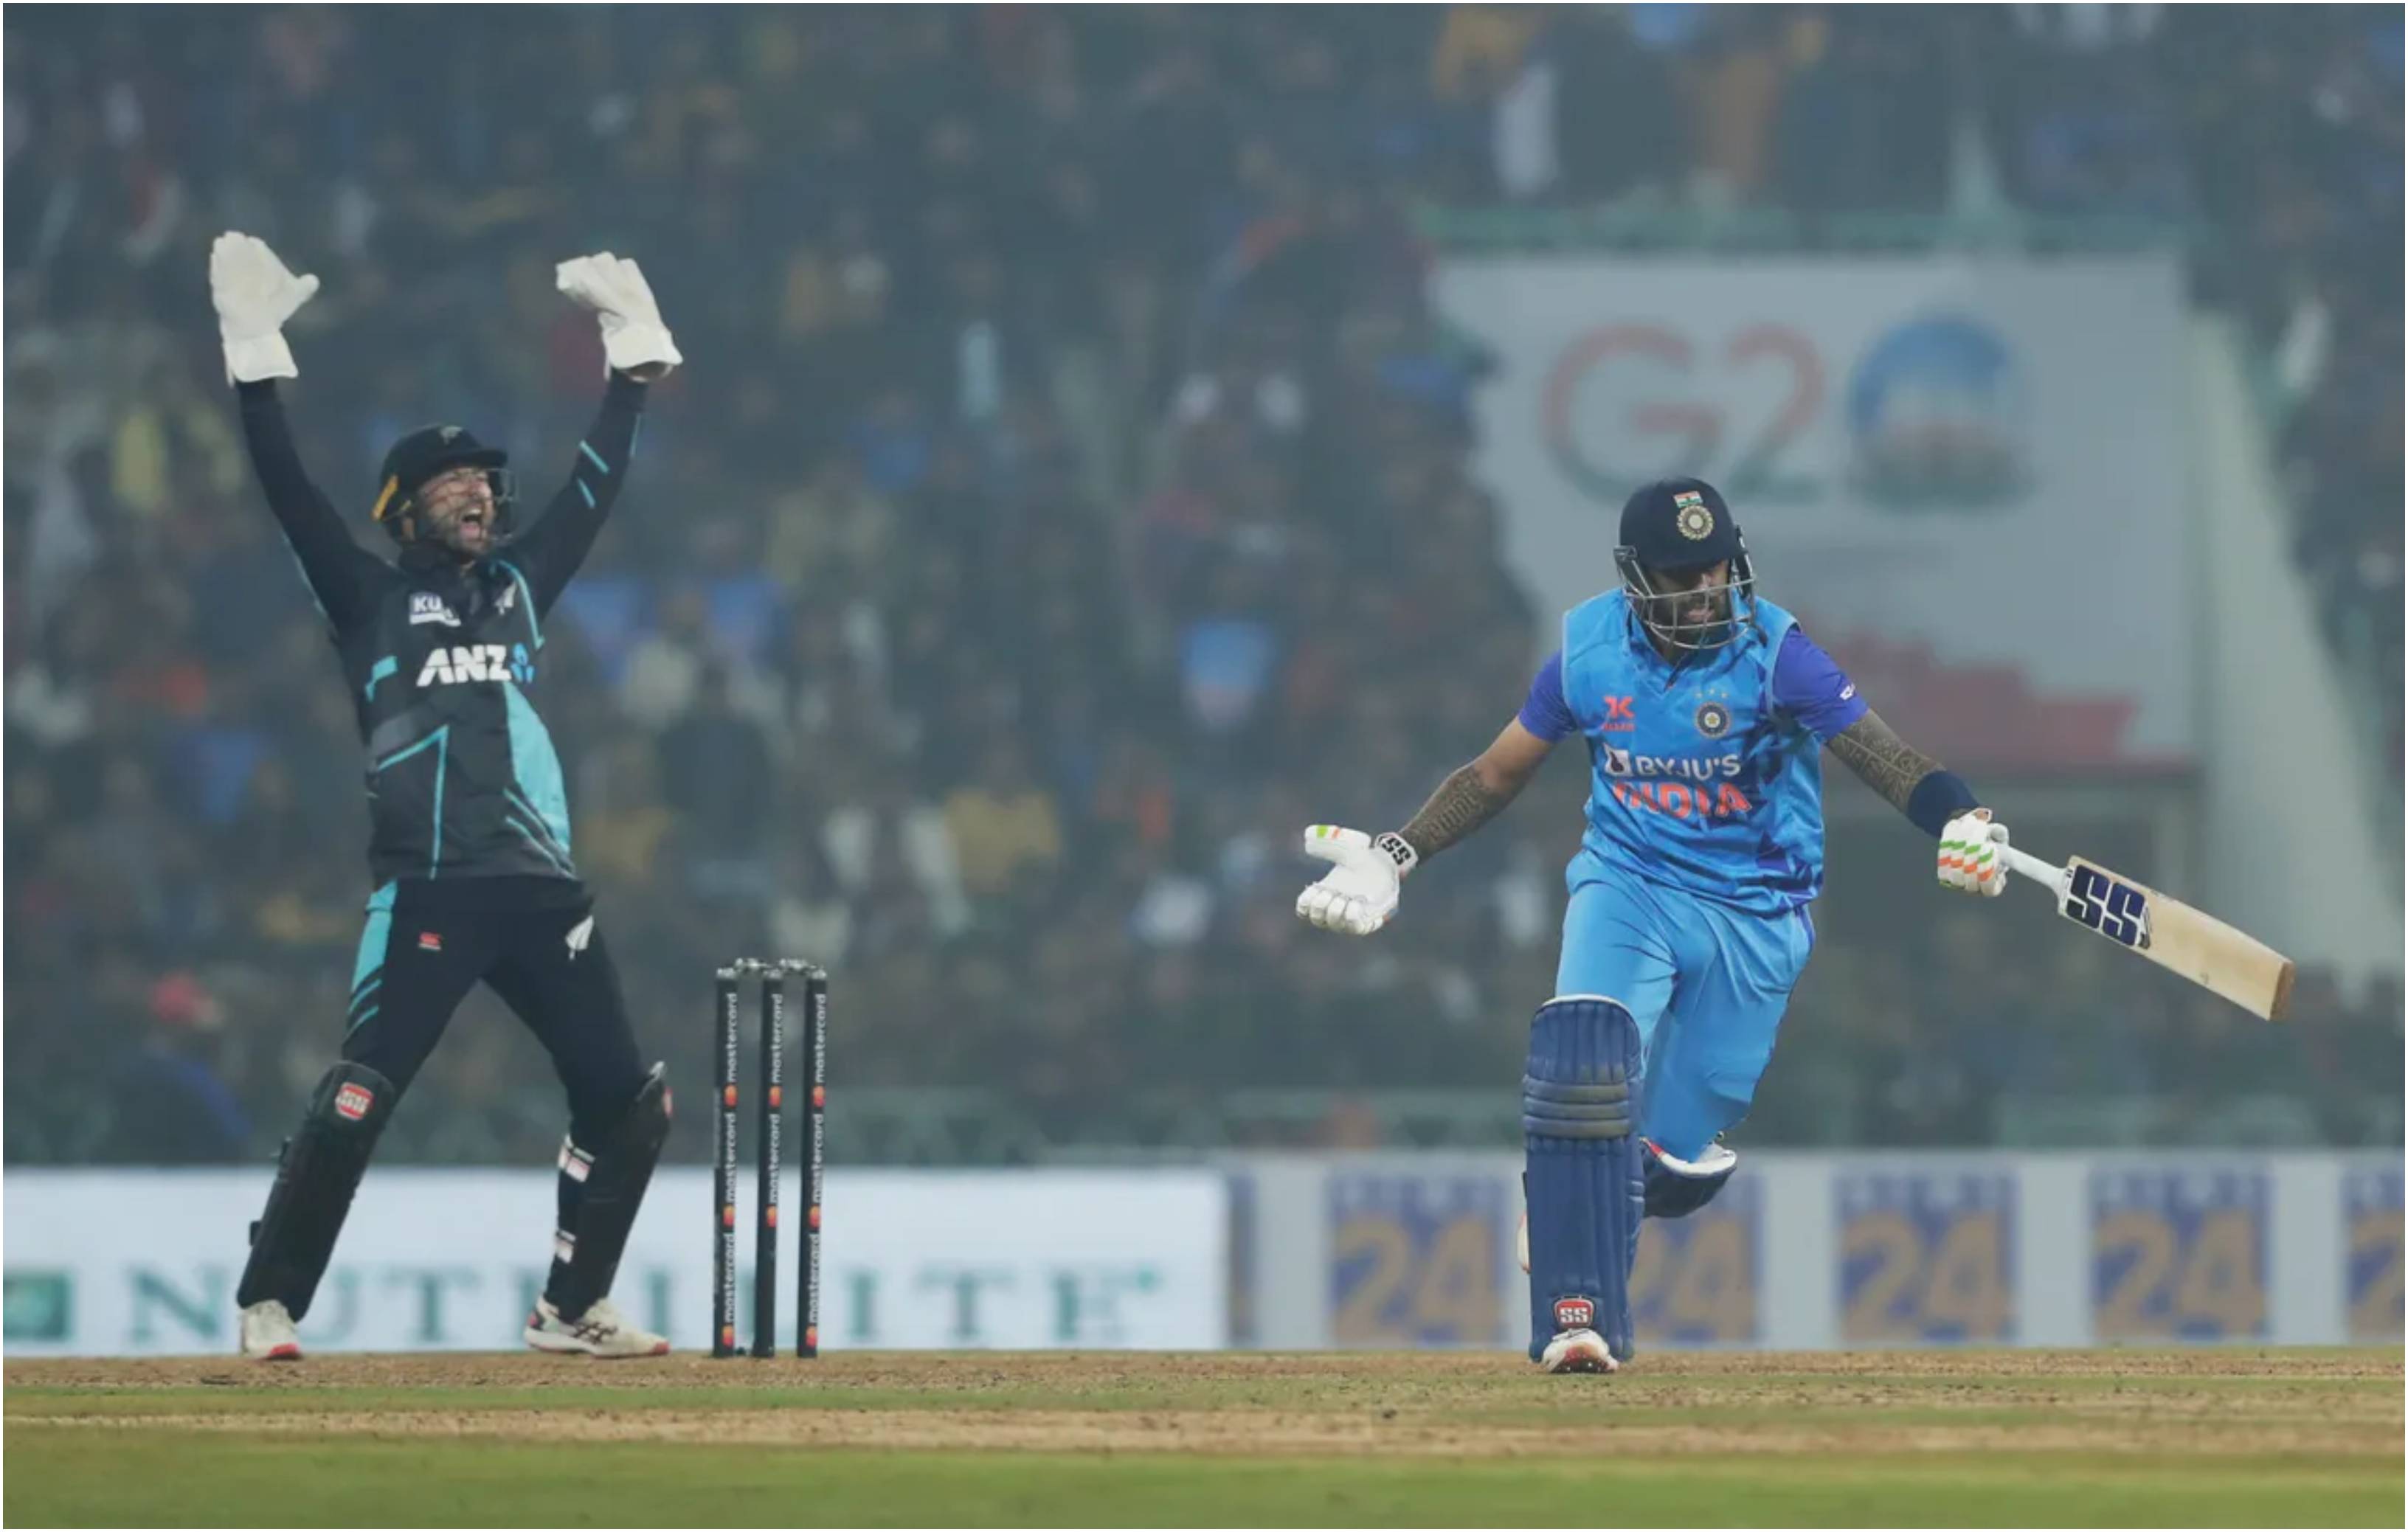 India defeated New Zealand in a low-scoring thriller in the second T20I | BCCI